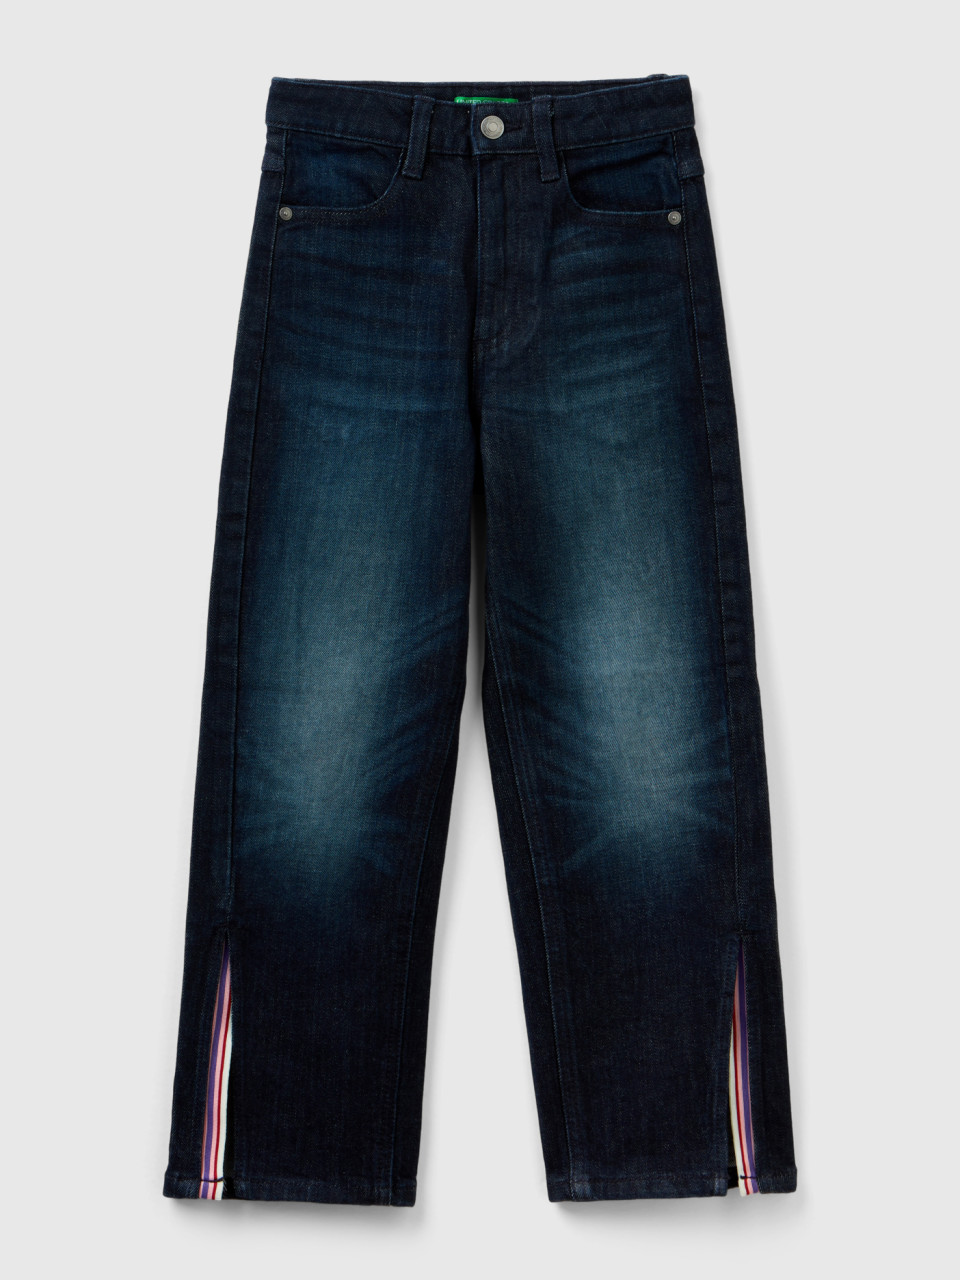 Benetton, Straight Fit Jeans With Slits, Dark Blue, Kids